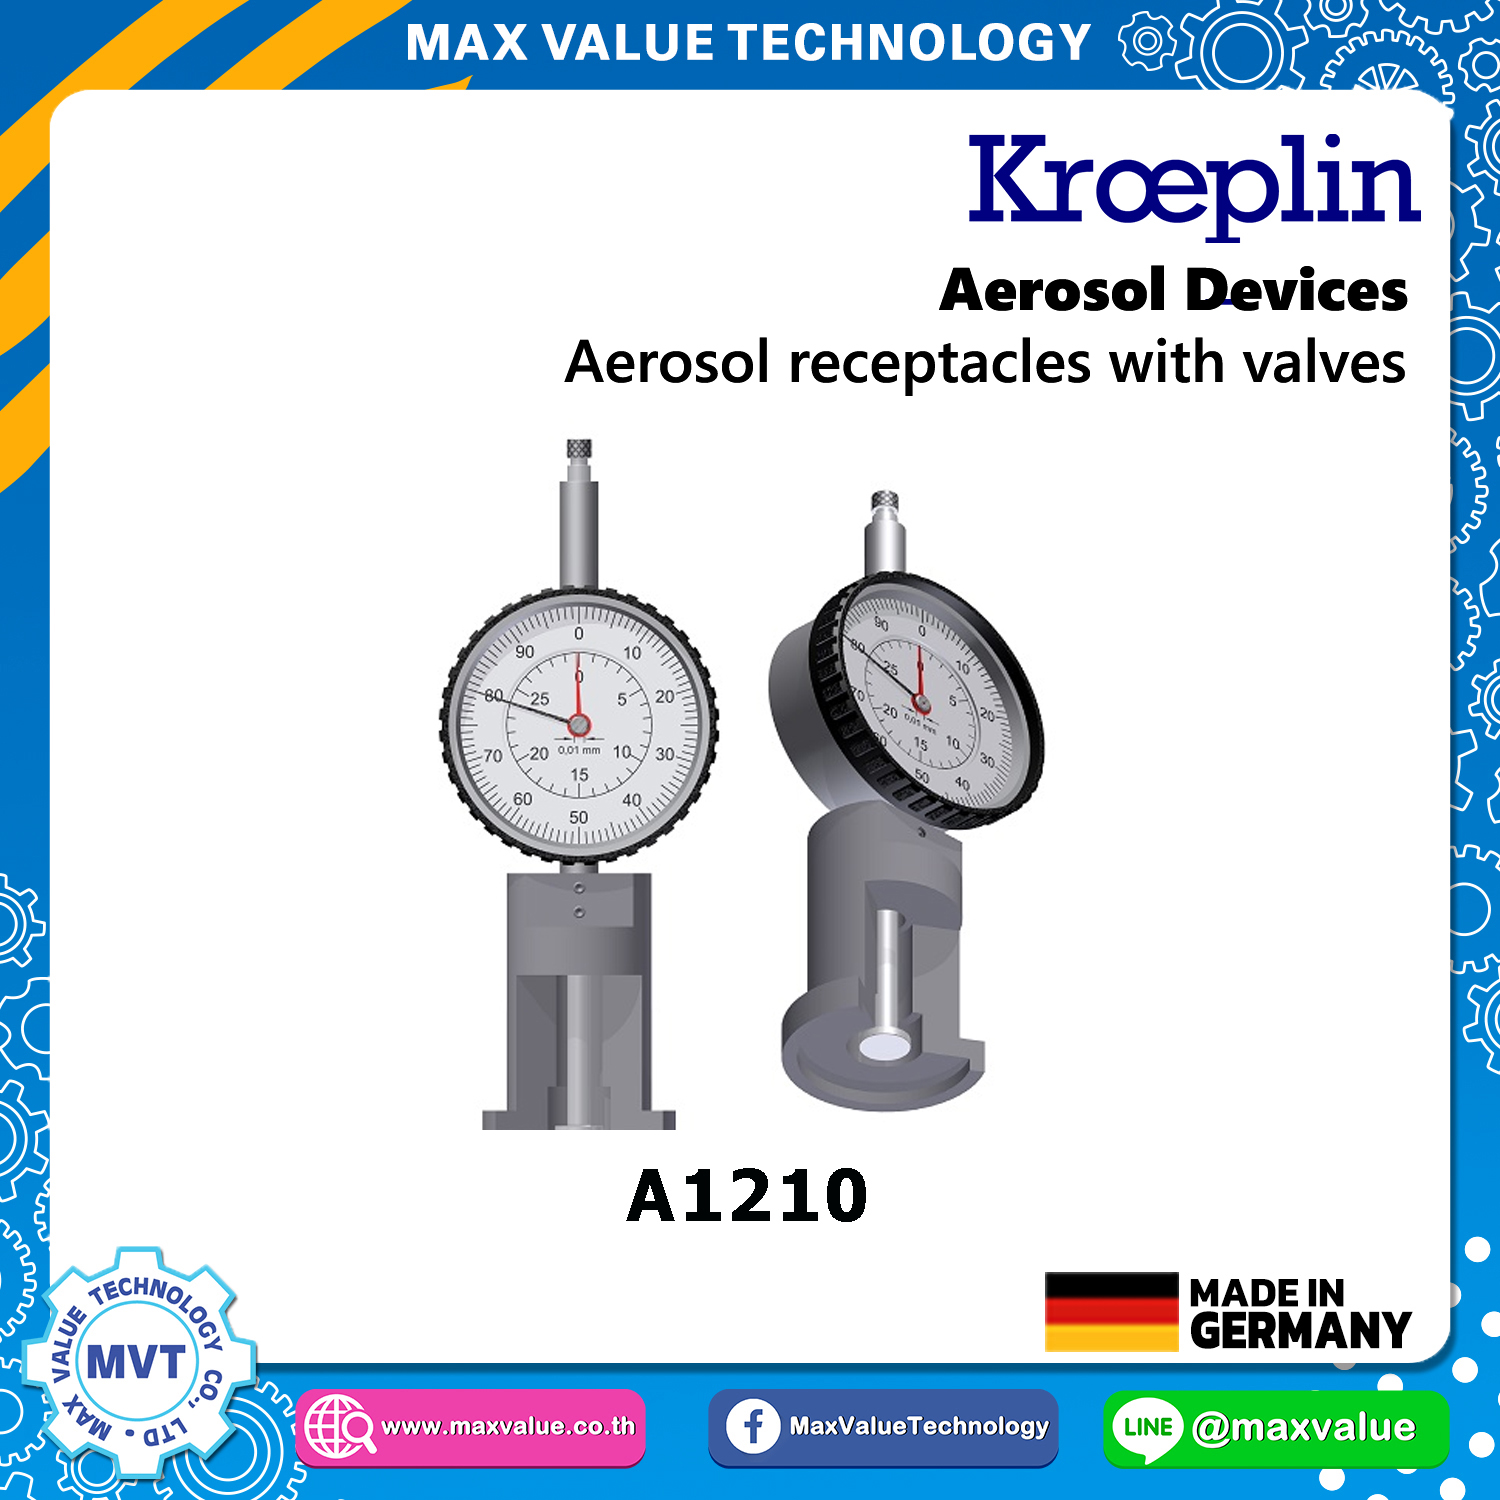 A1210/AE1210 - Aerosol devices - Aerosol receptacles with valves